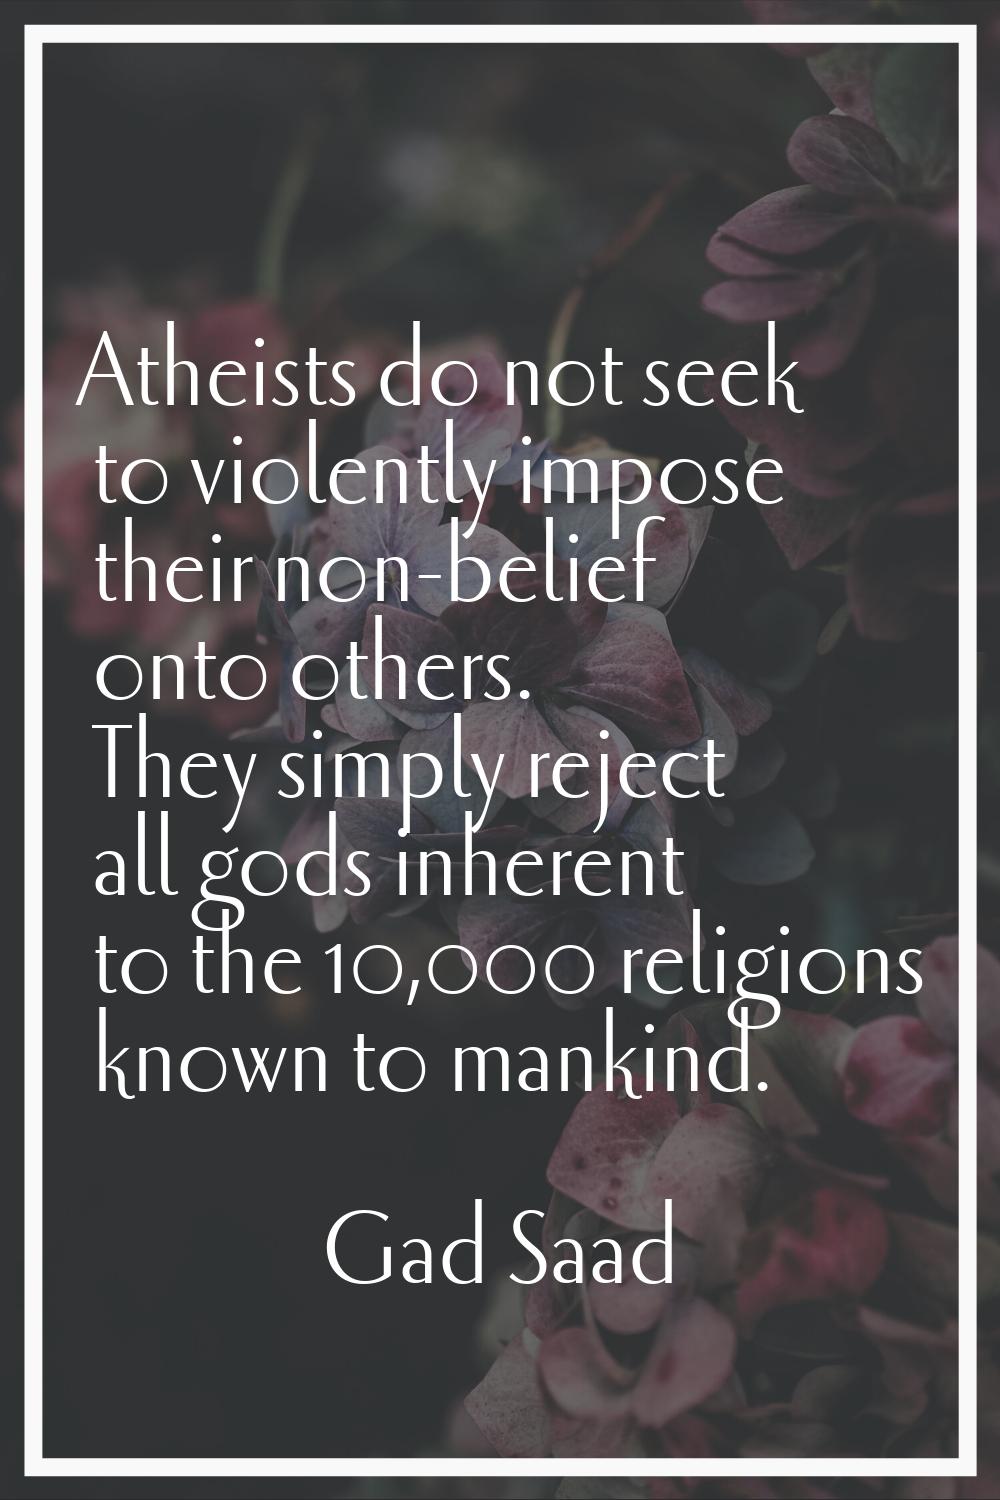 Atheists do not seek to violently impose their non-belief onto others. They simply reject all gods 